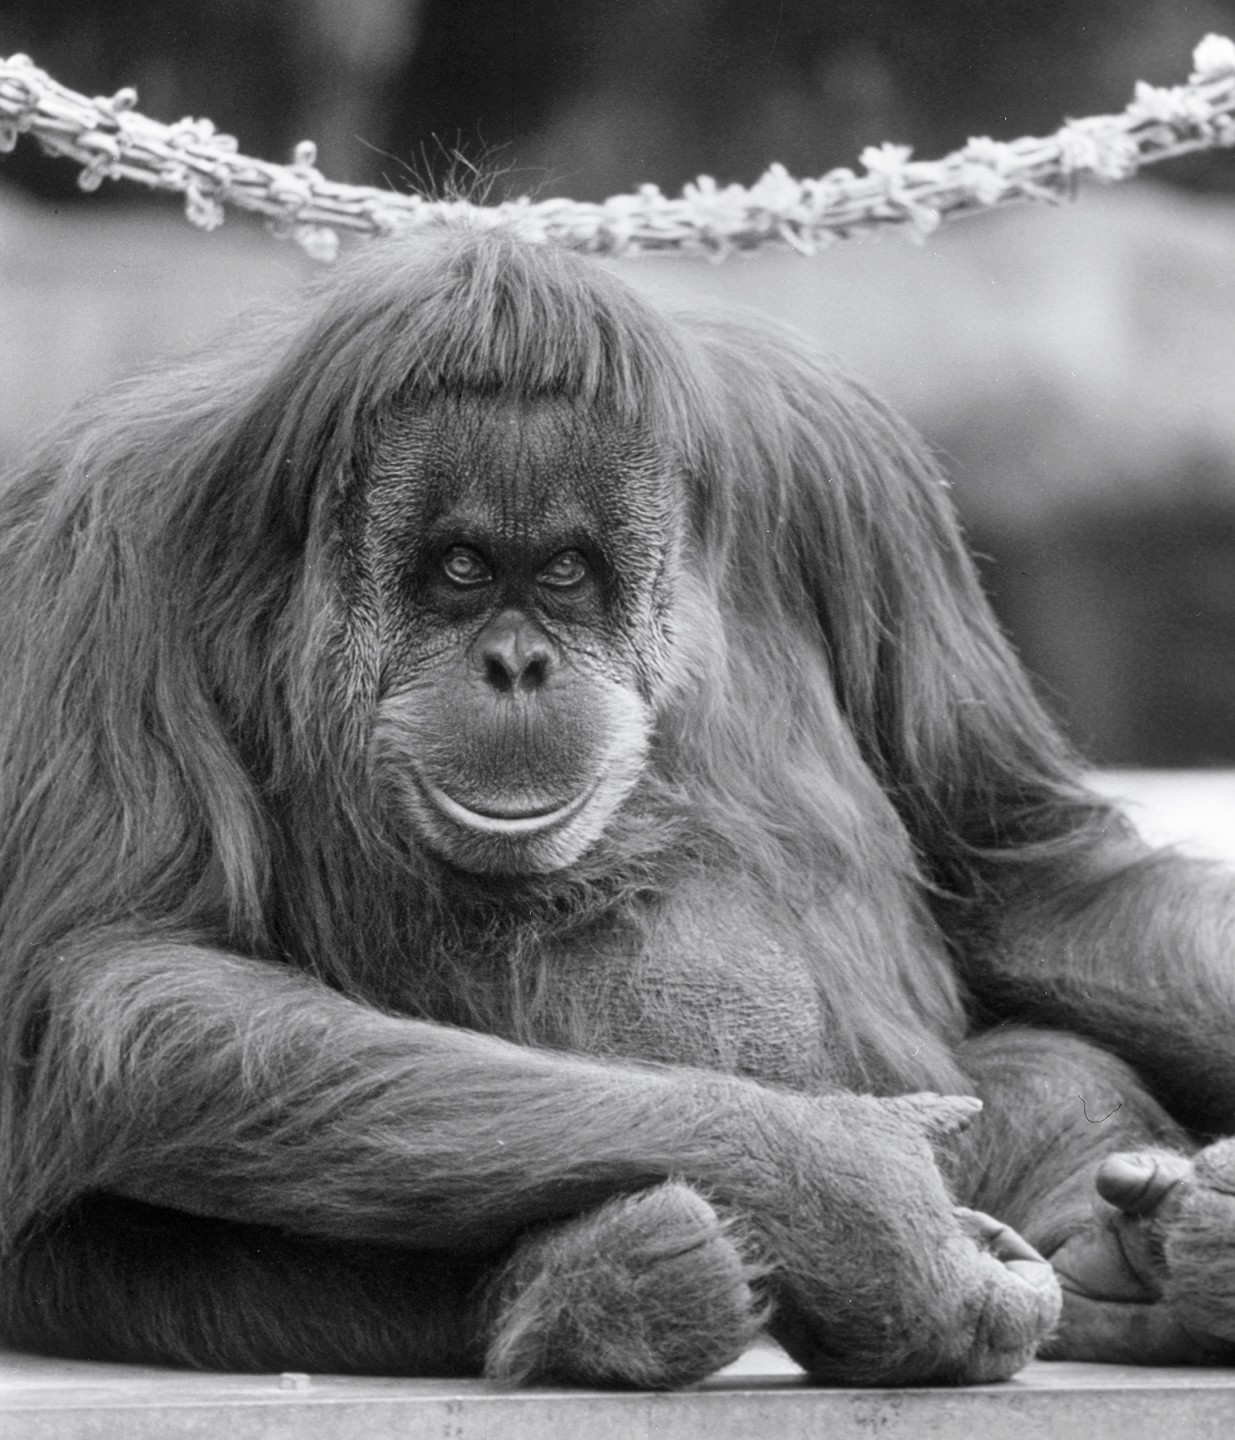 Doris the orangutan actually came to the Zoo the year before Ahkup and Batavia, but she joined them once they arrived.